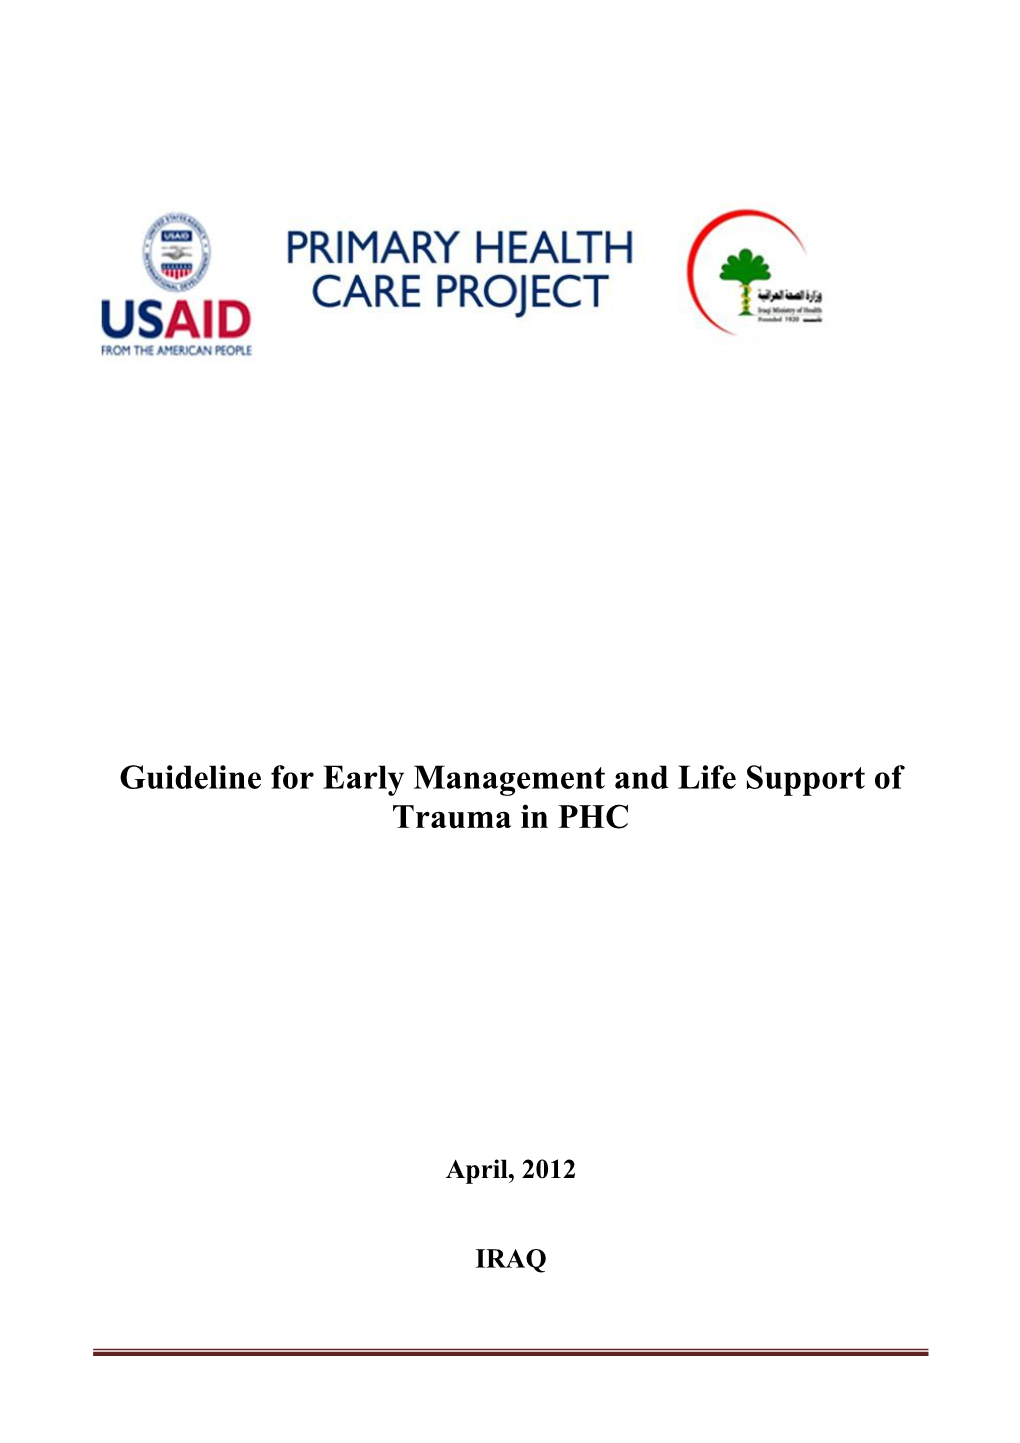 Guideline for Early Management and Life Support of Trauma in PHC